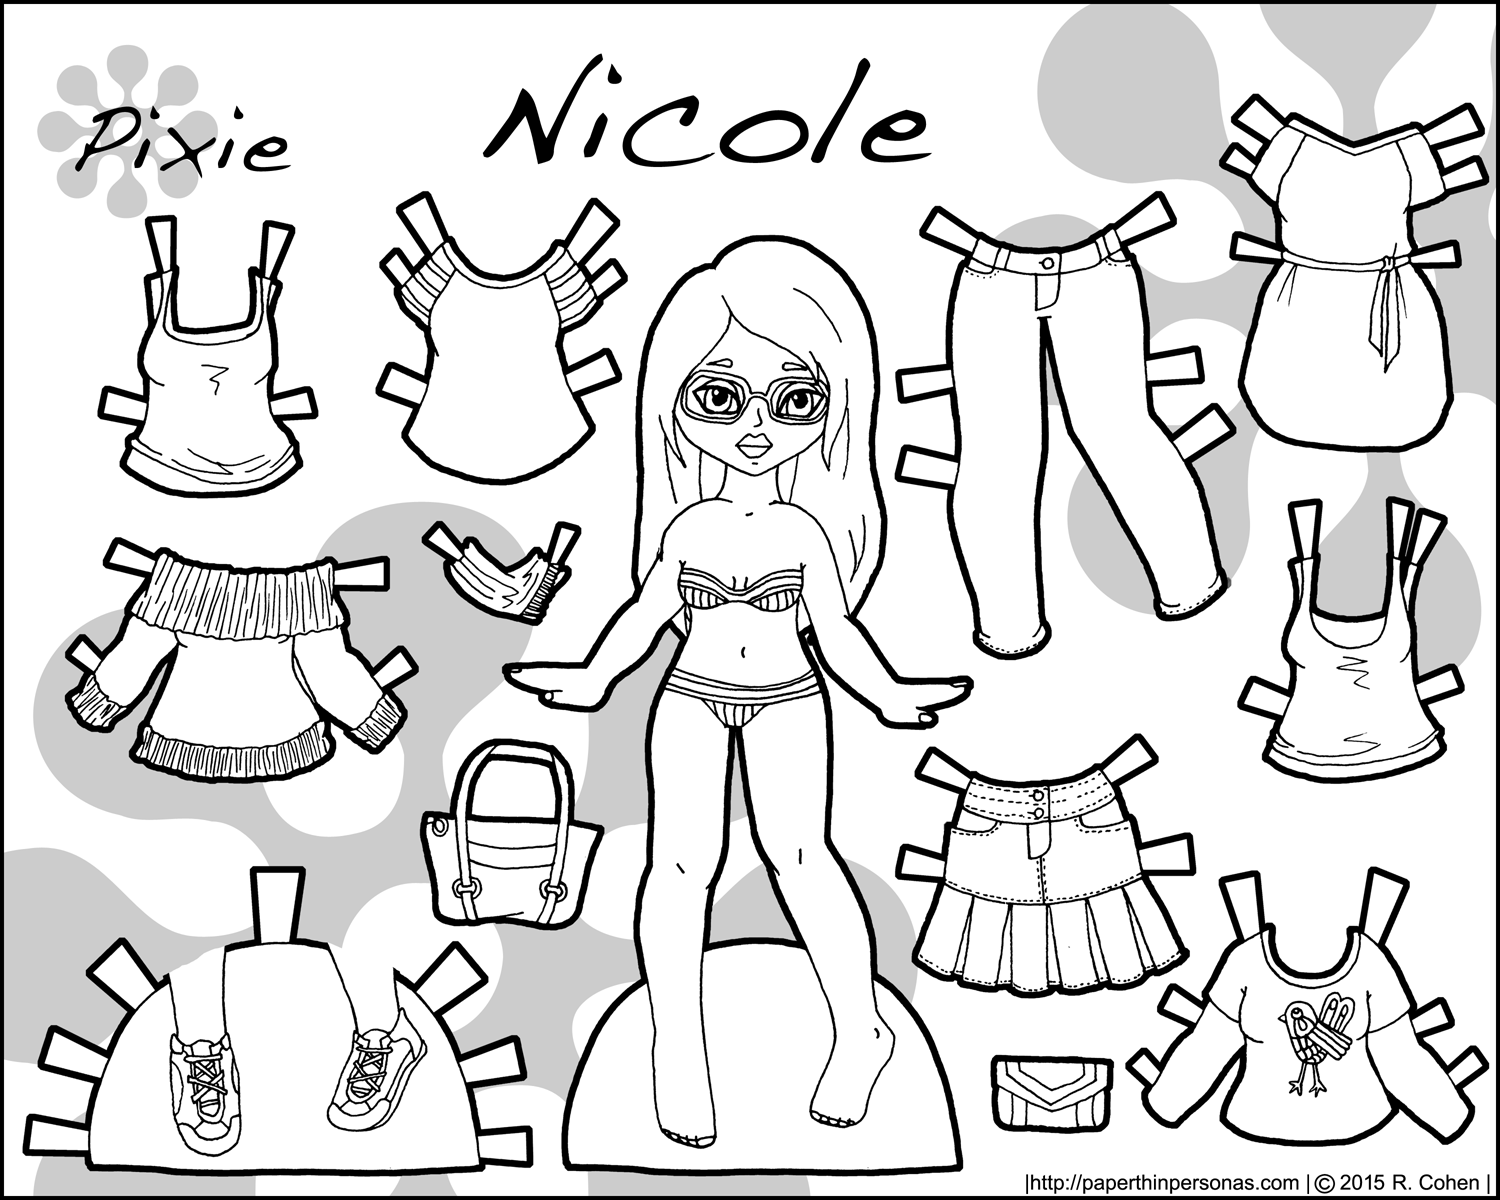 nicole-a-printable-paper-doll-paper-thin-personas